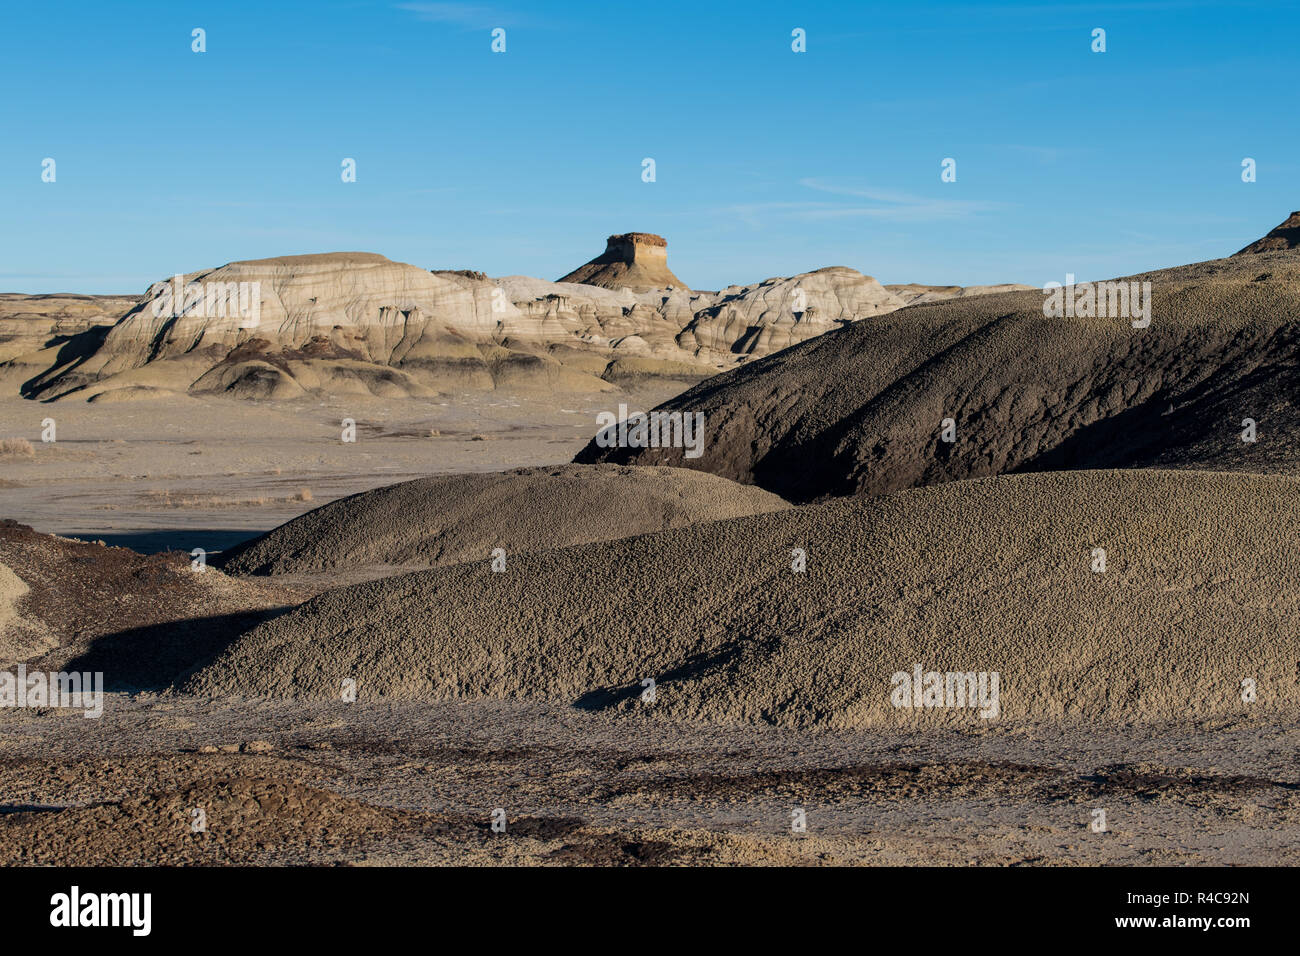 A distant mesa rises above a desert landscape with textured, grainy hills and soil in the Bisti Badlands of New Mexico Stock Photo